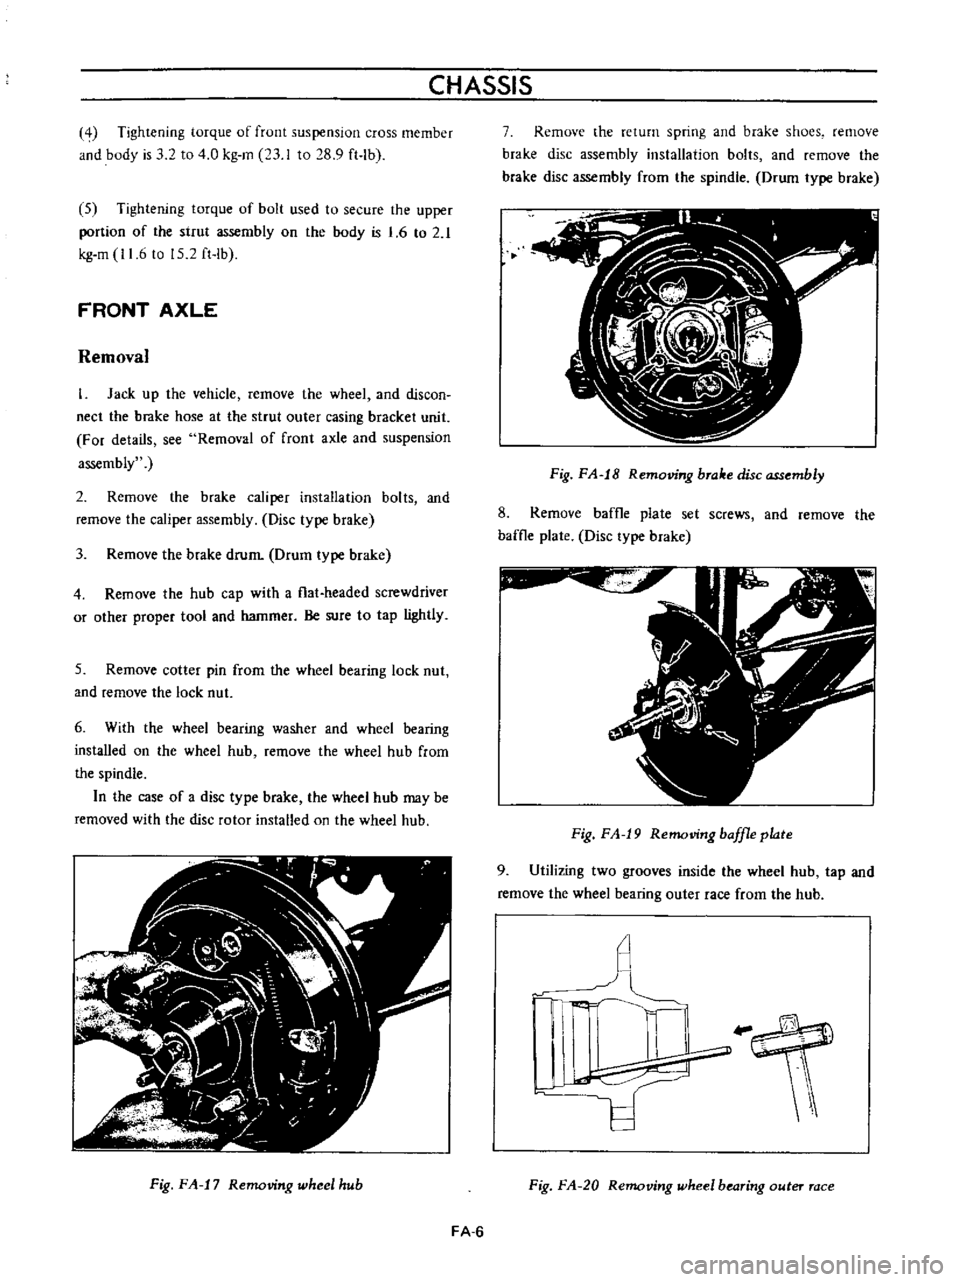 DATSUN B110 1973  Service Repair Manual 
CHASSIS

Tightening

torque 
of

front

suspension 
cross 
member

and

body 
is 
3 
2 
to 
4 
0

kg 
m 
23

1 
to 
28

9 
ft

Ib

5

Tightening 
torque 
of 
bolt

used 
to

secure 
the

upper

porti